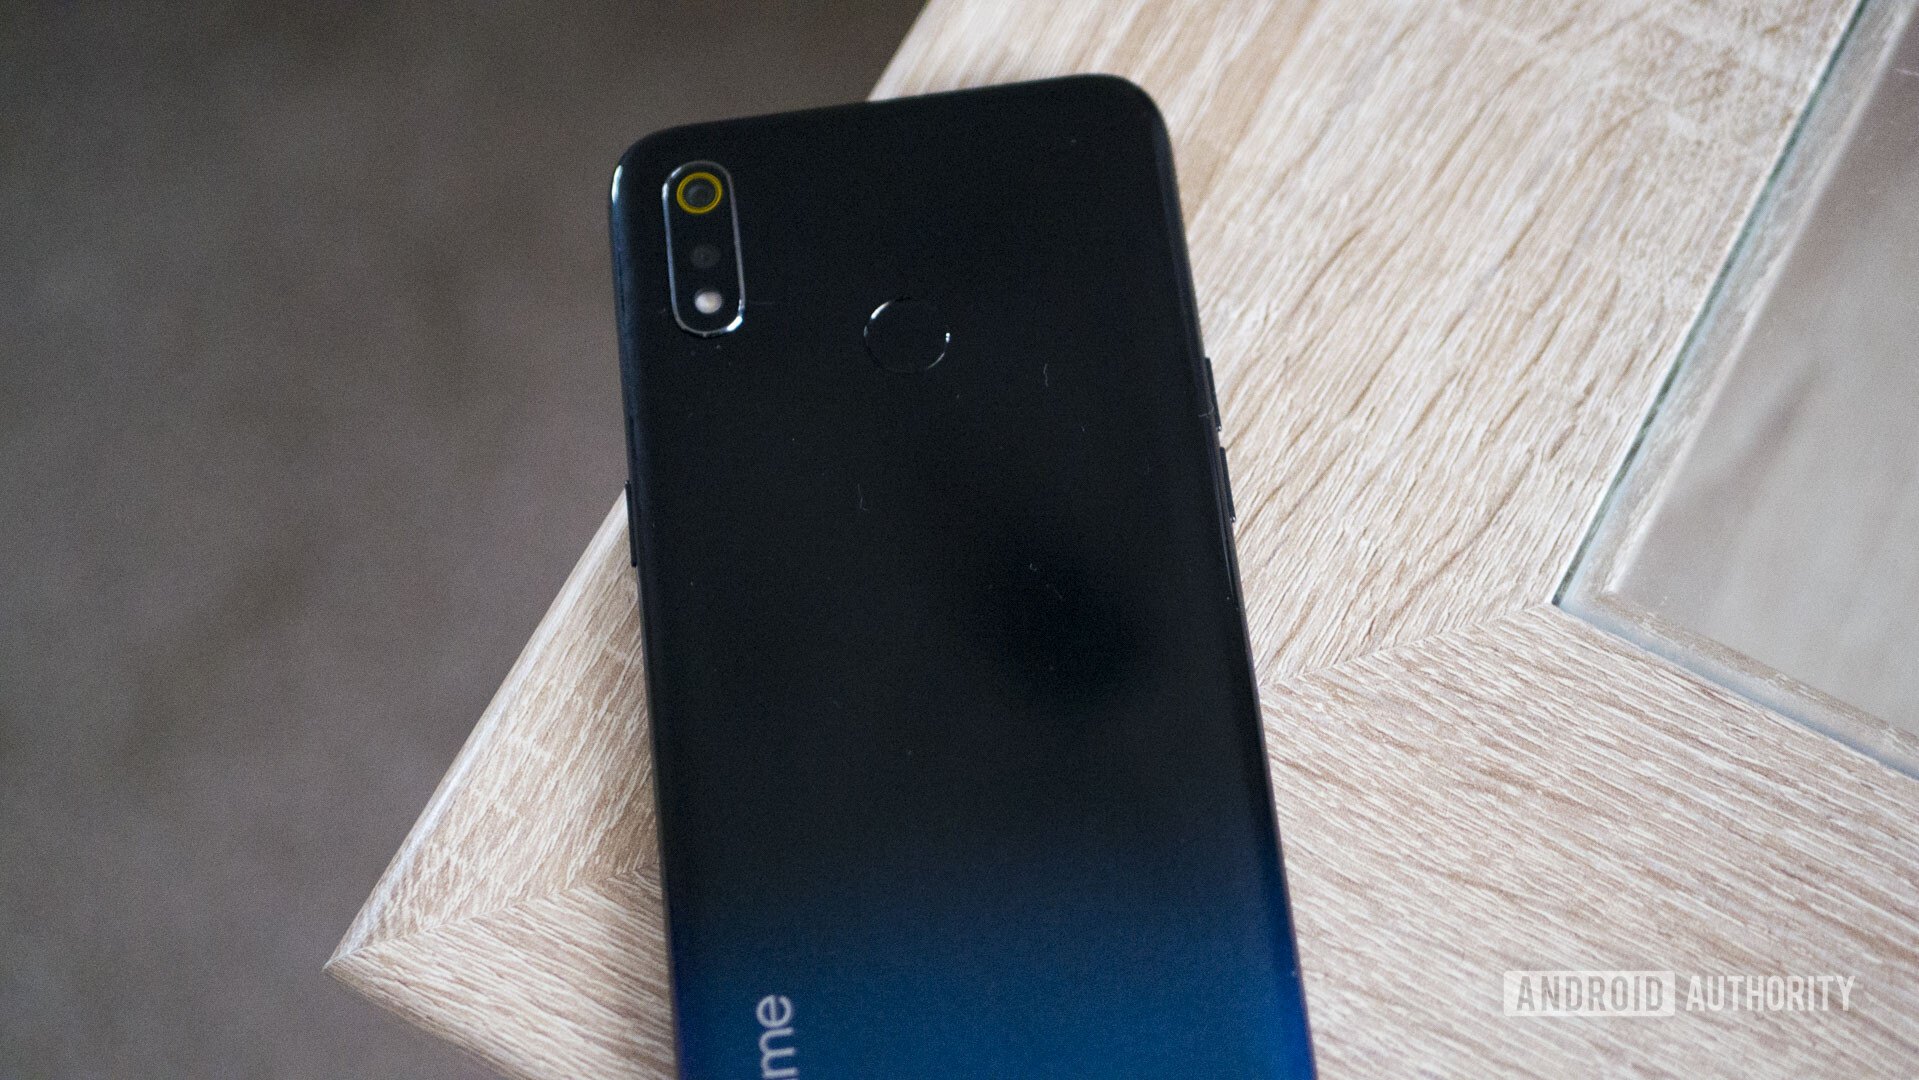 Backside of a black Realme 3 laid on a table.